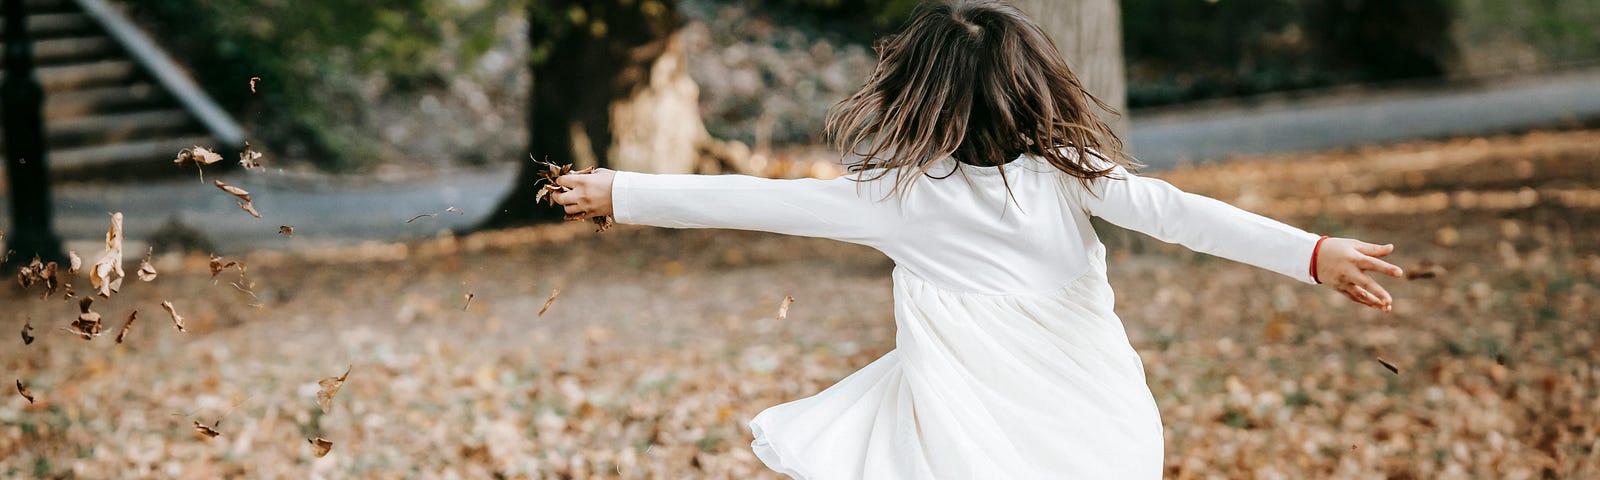 Little girl with her arms outstretched dancing around in the fall leaves